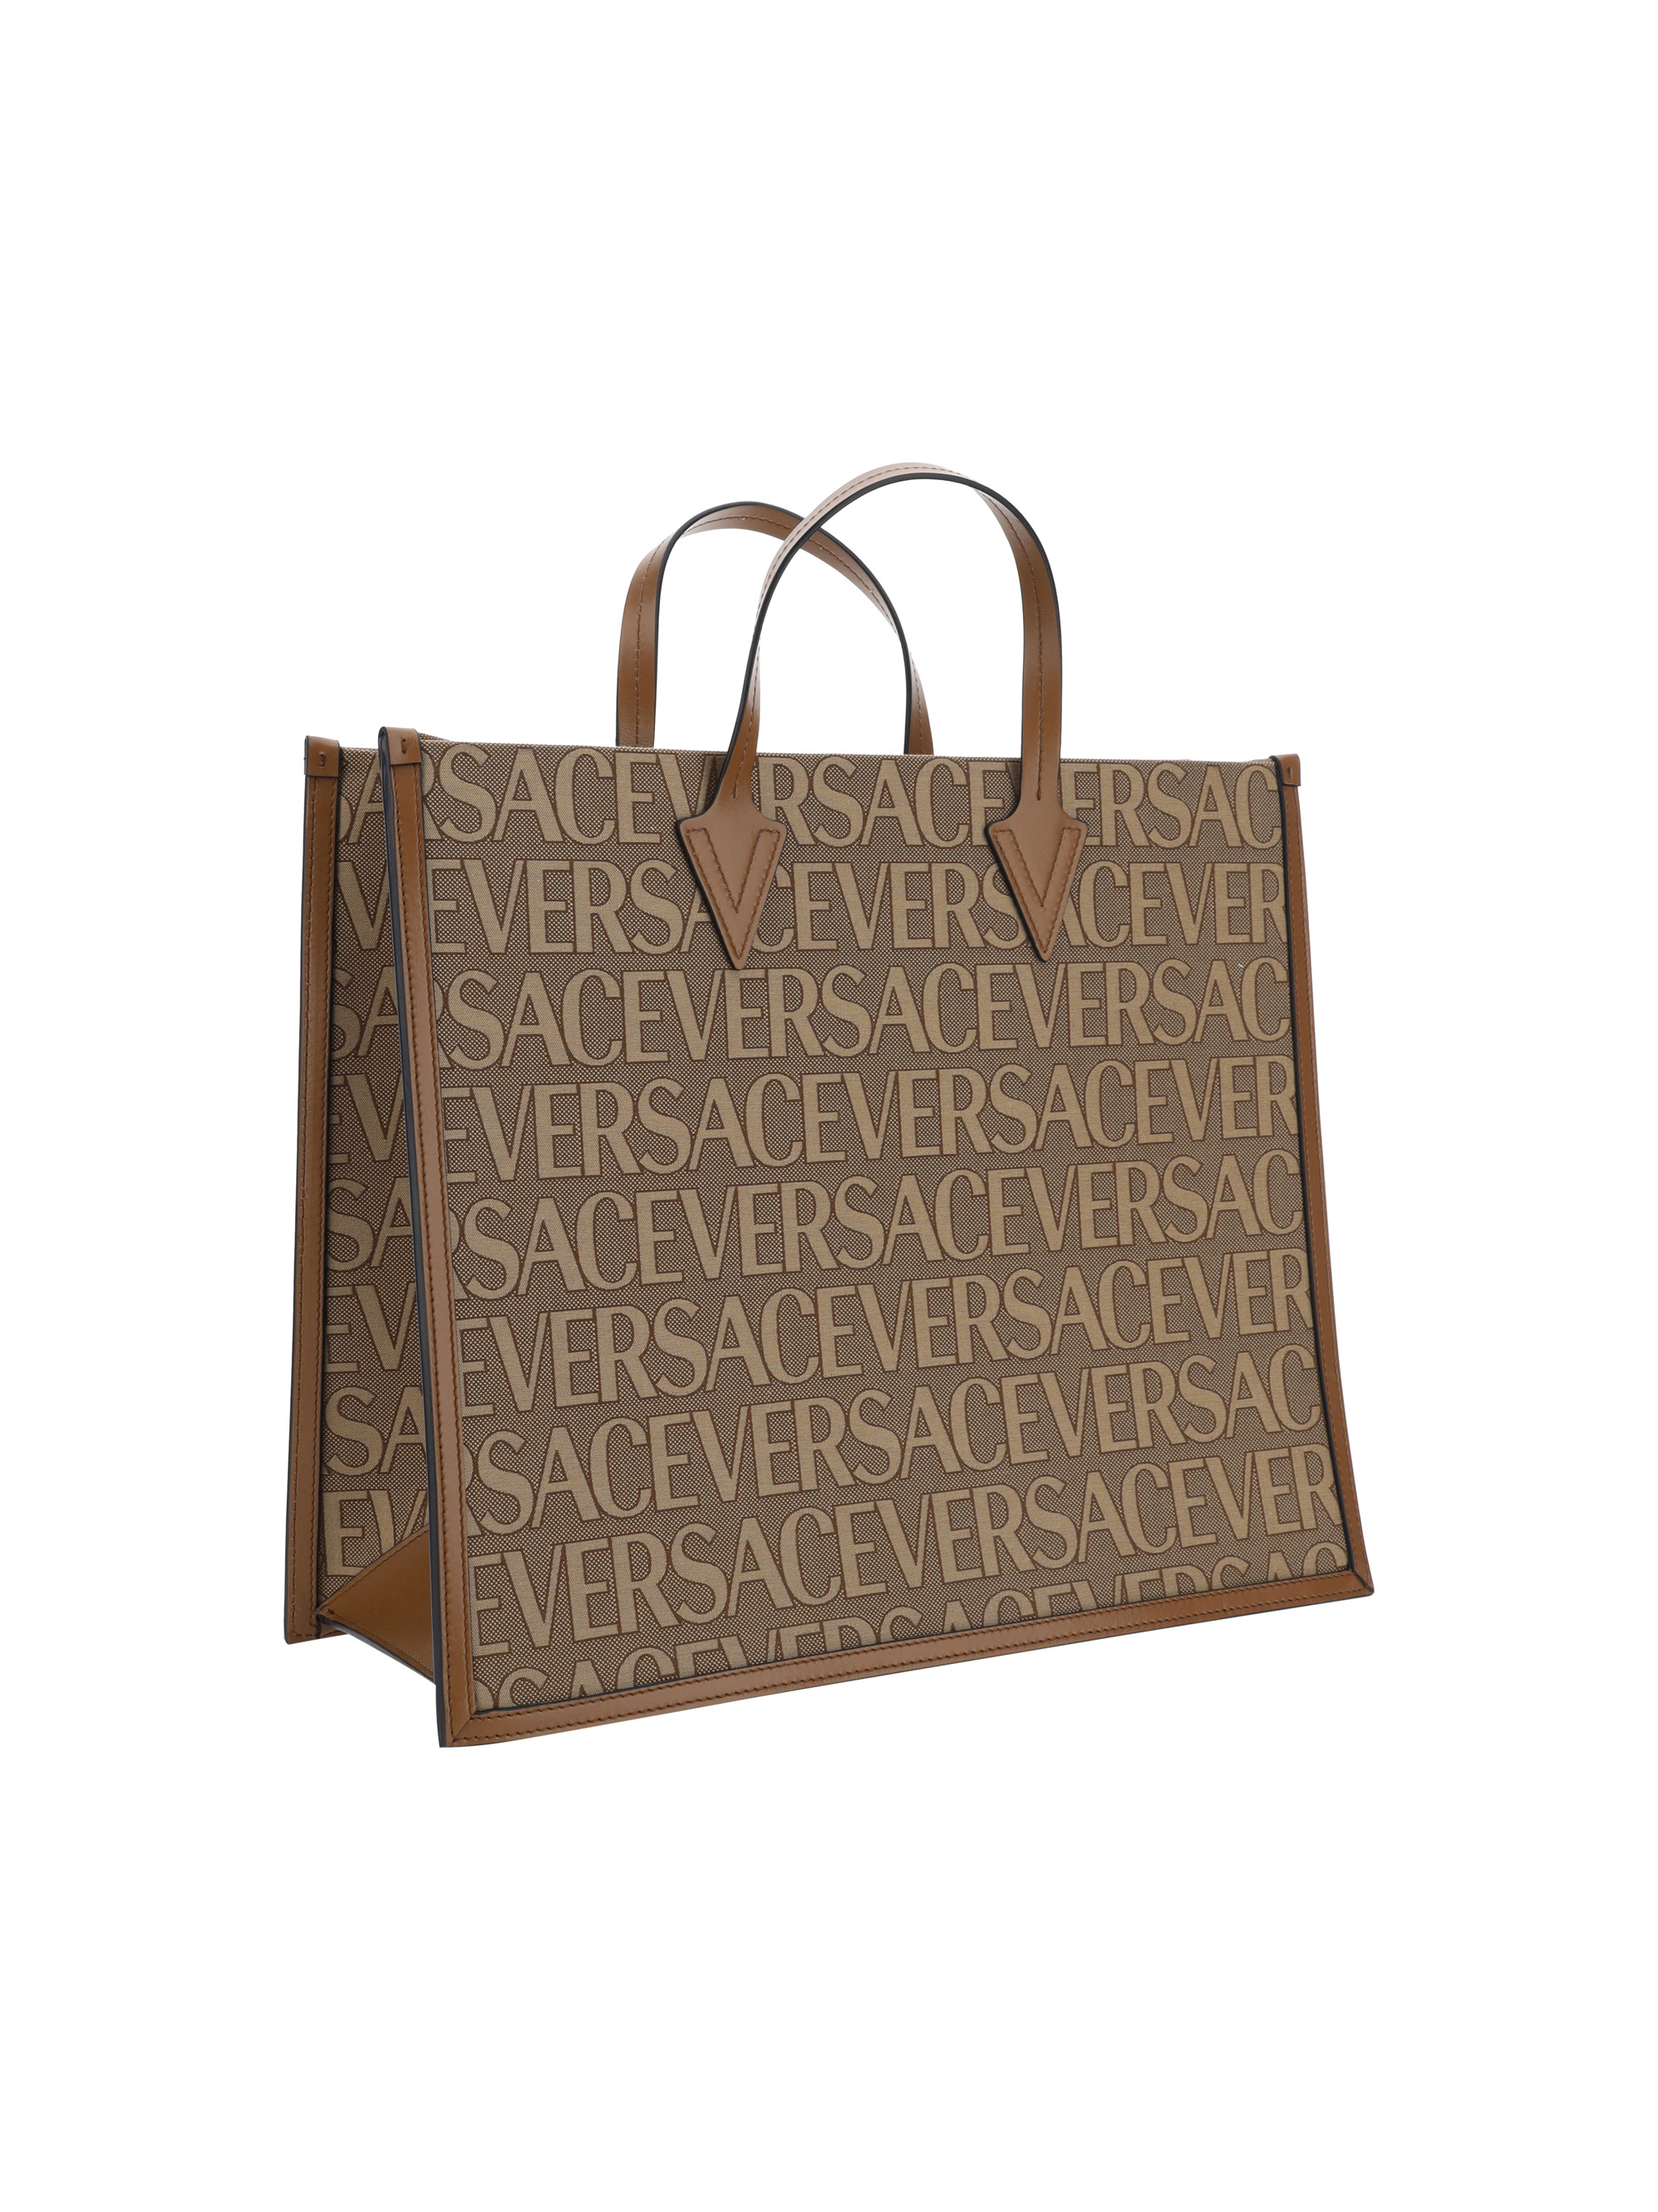 Sale Now on at Versace Outlet Near London, UK | Bicester Village